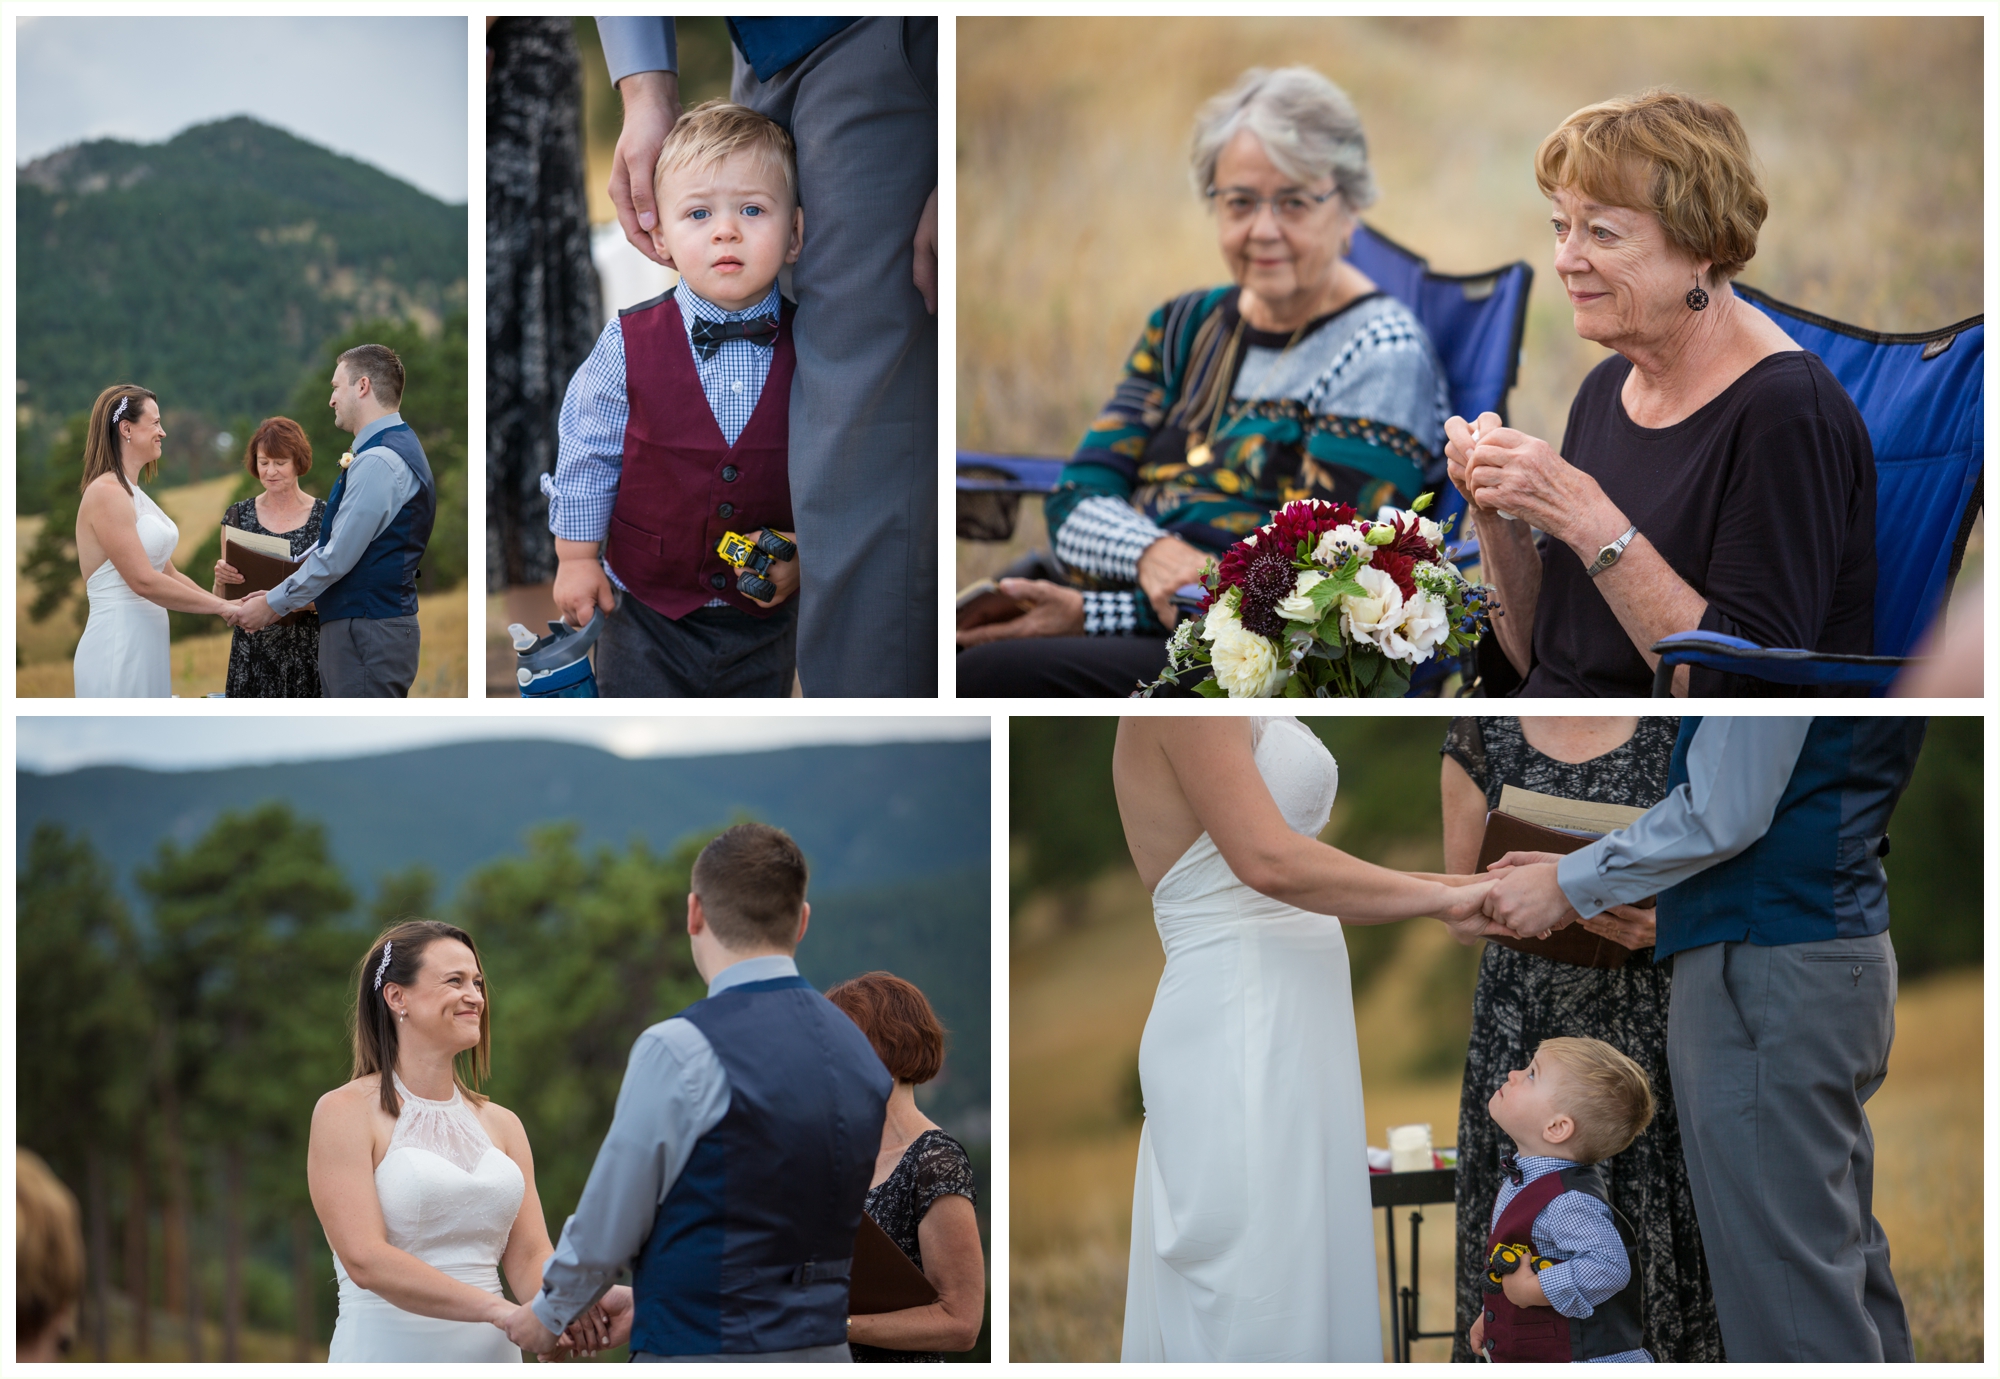 sweet candid moments during intimate elopement at betasso preserve boulder colorado wedding ceremony